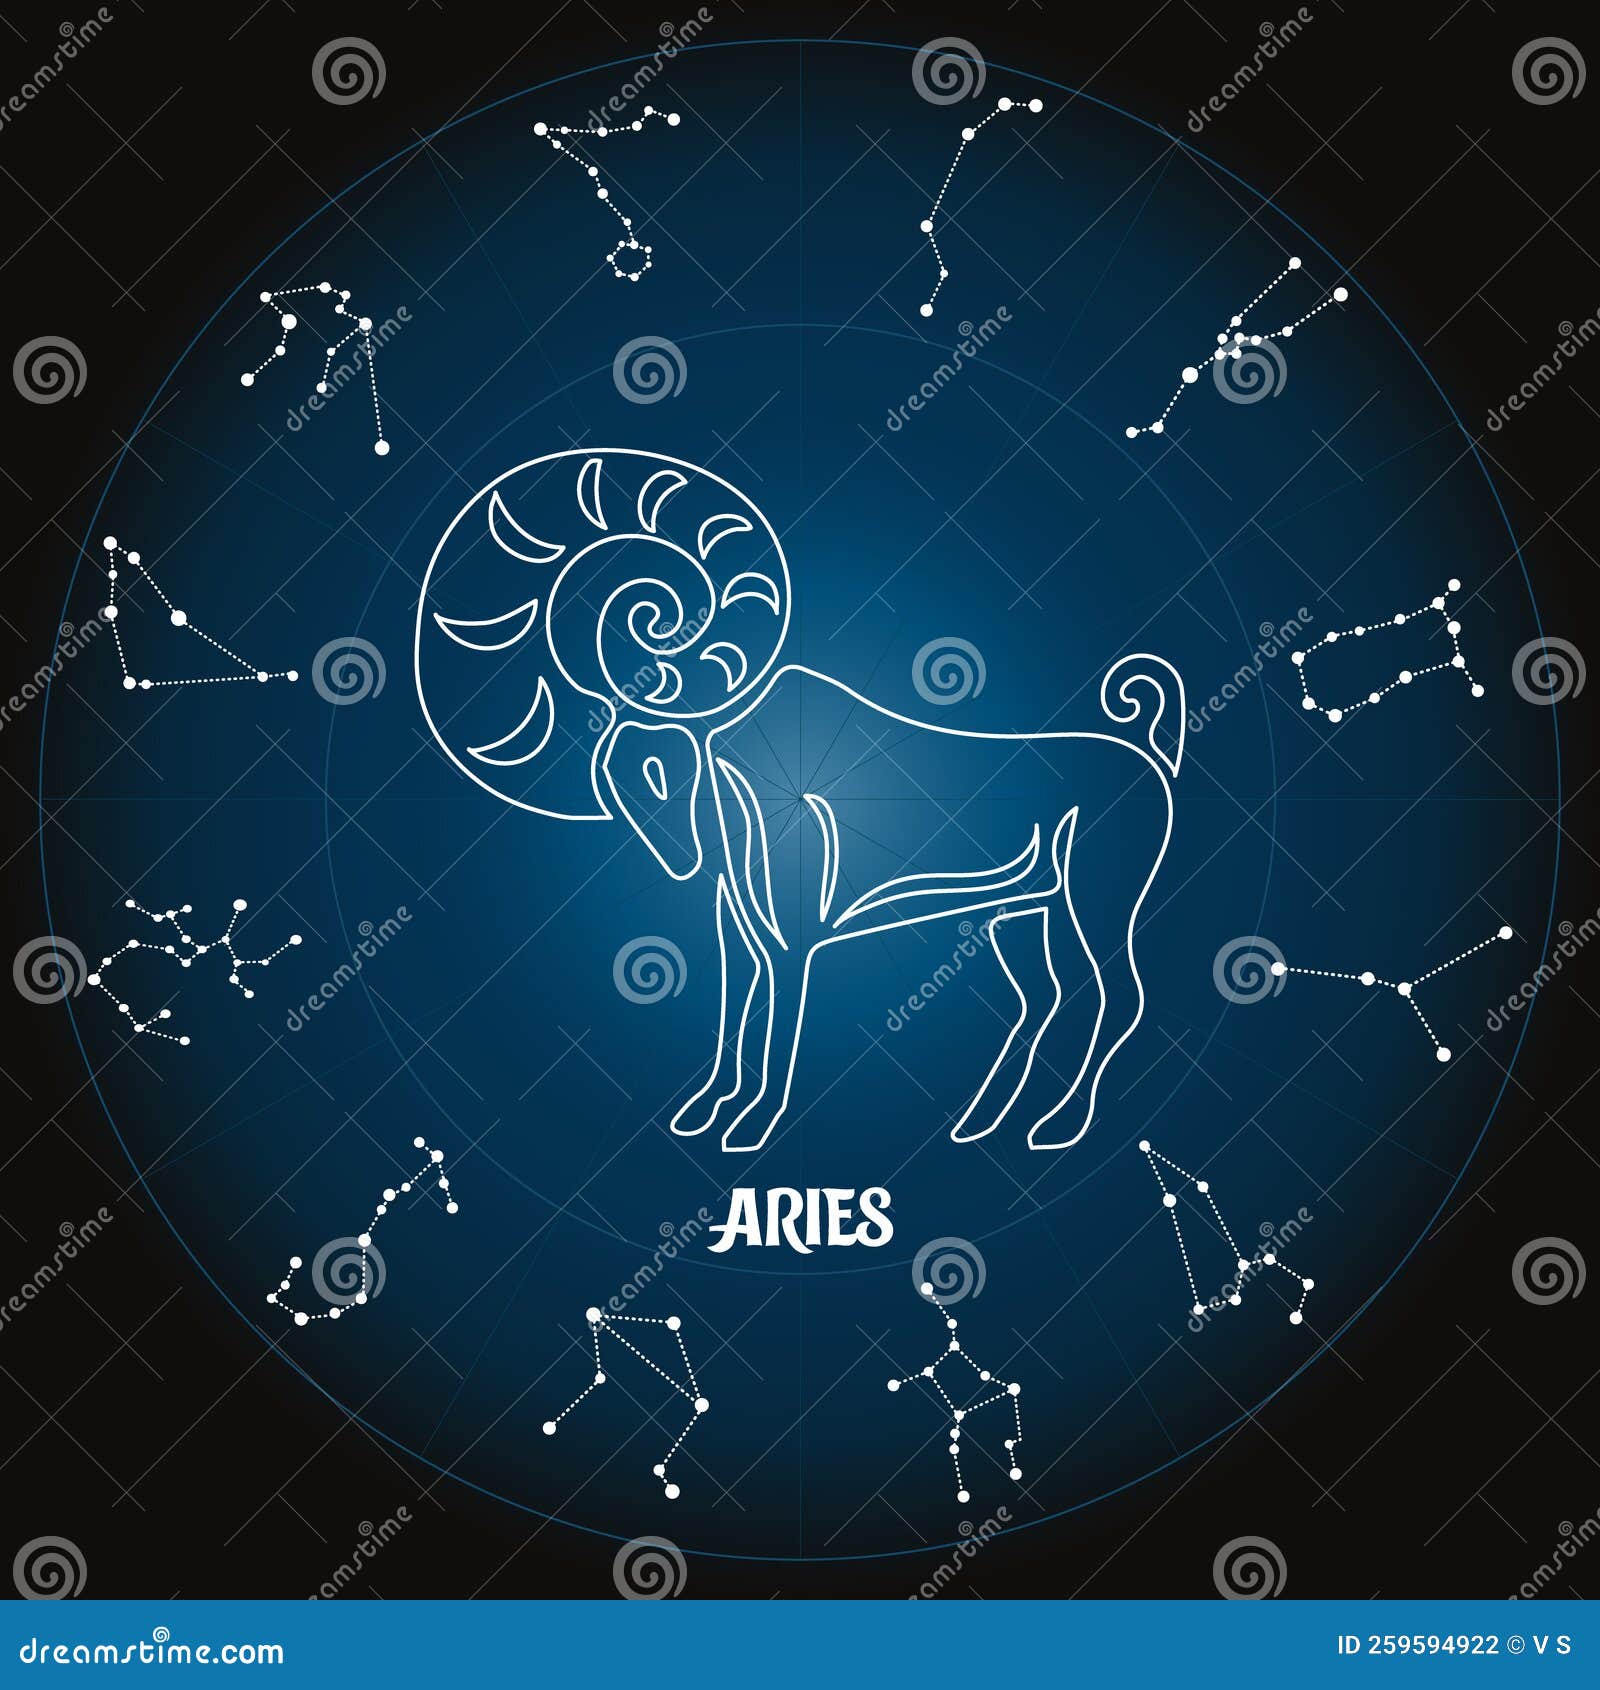 Aries Zodiac Sign in Astrological Circle with Zodiac Constellations ...